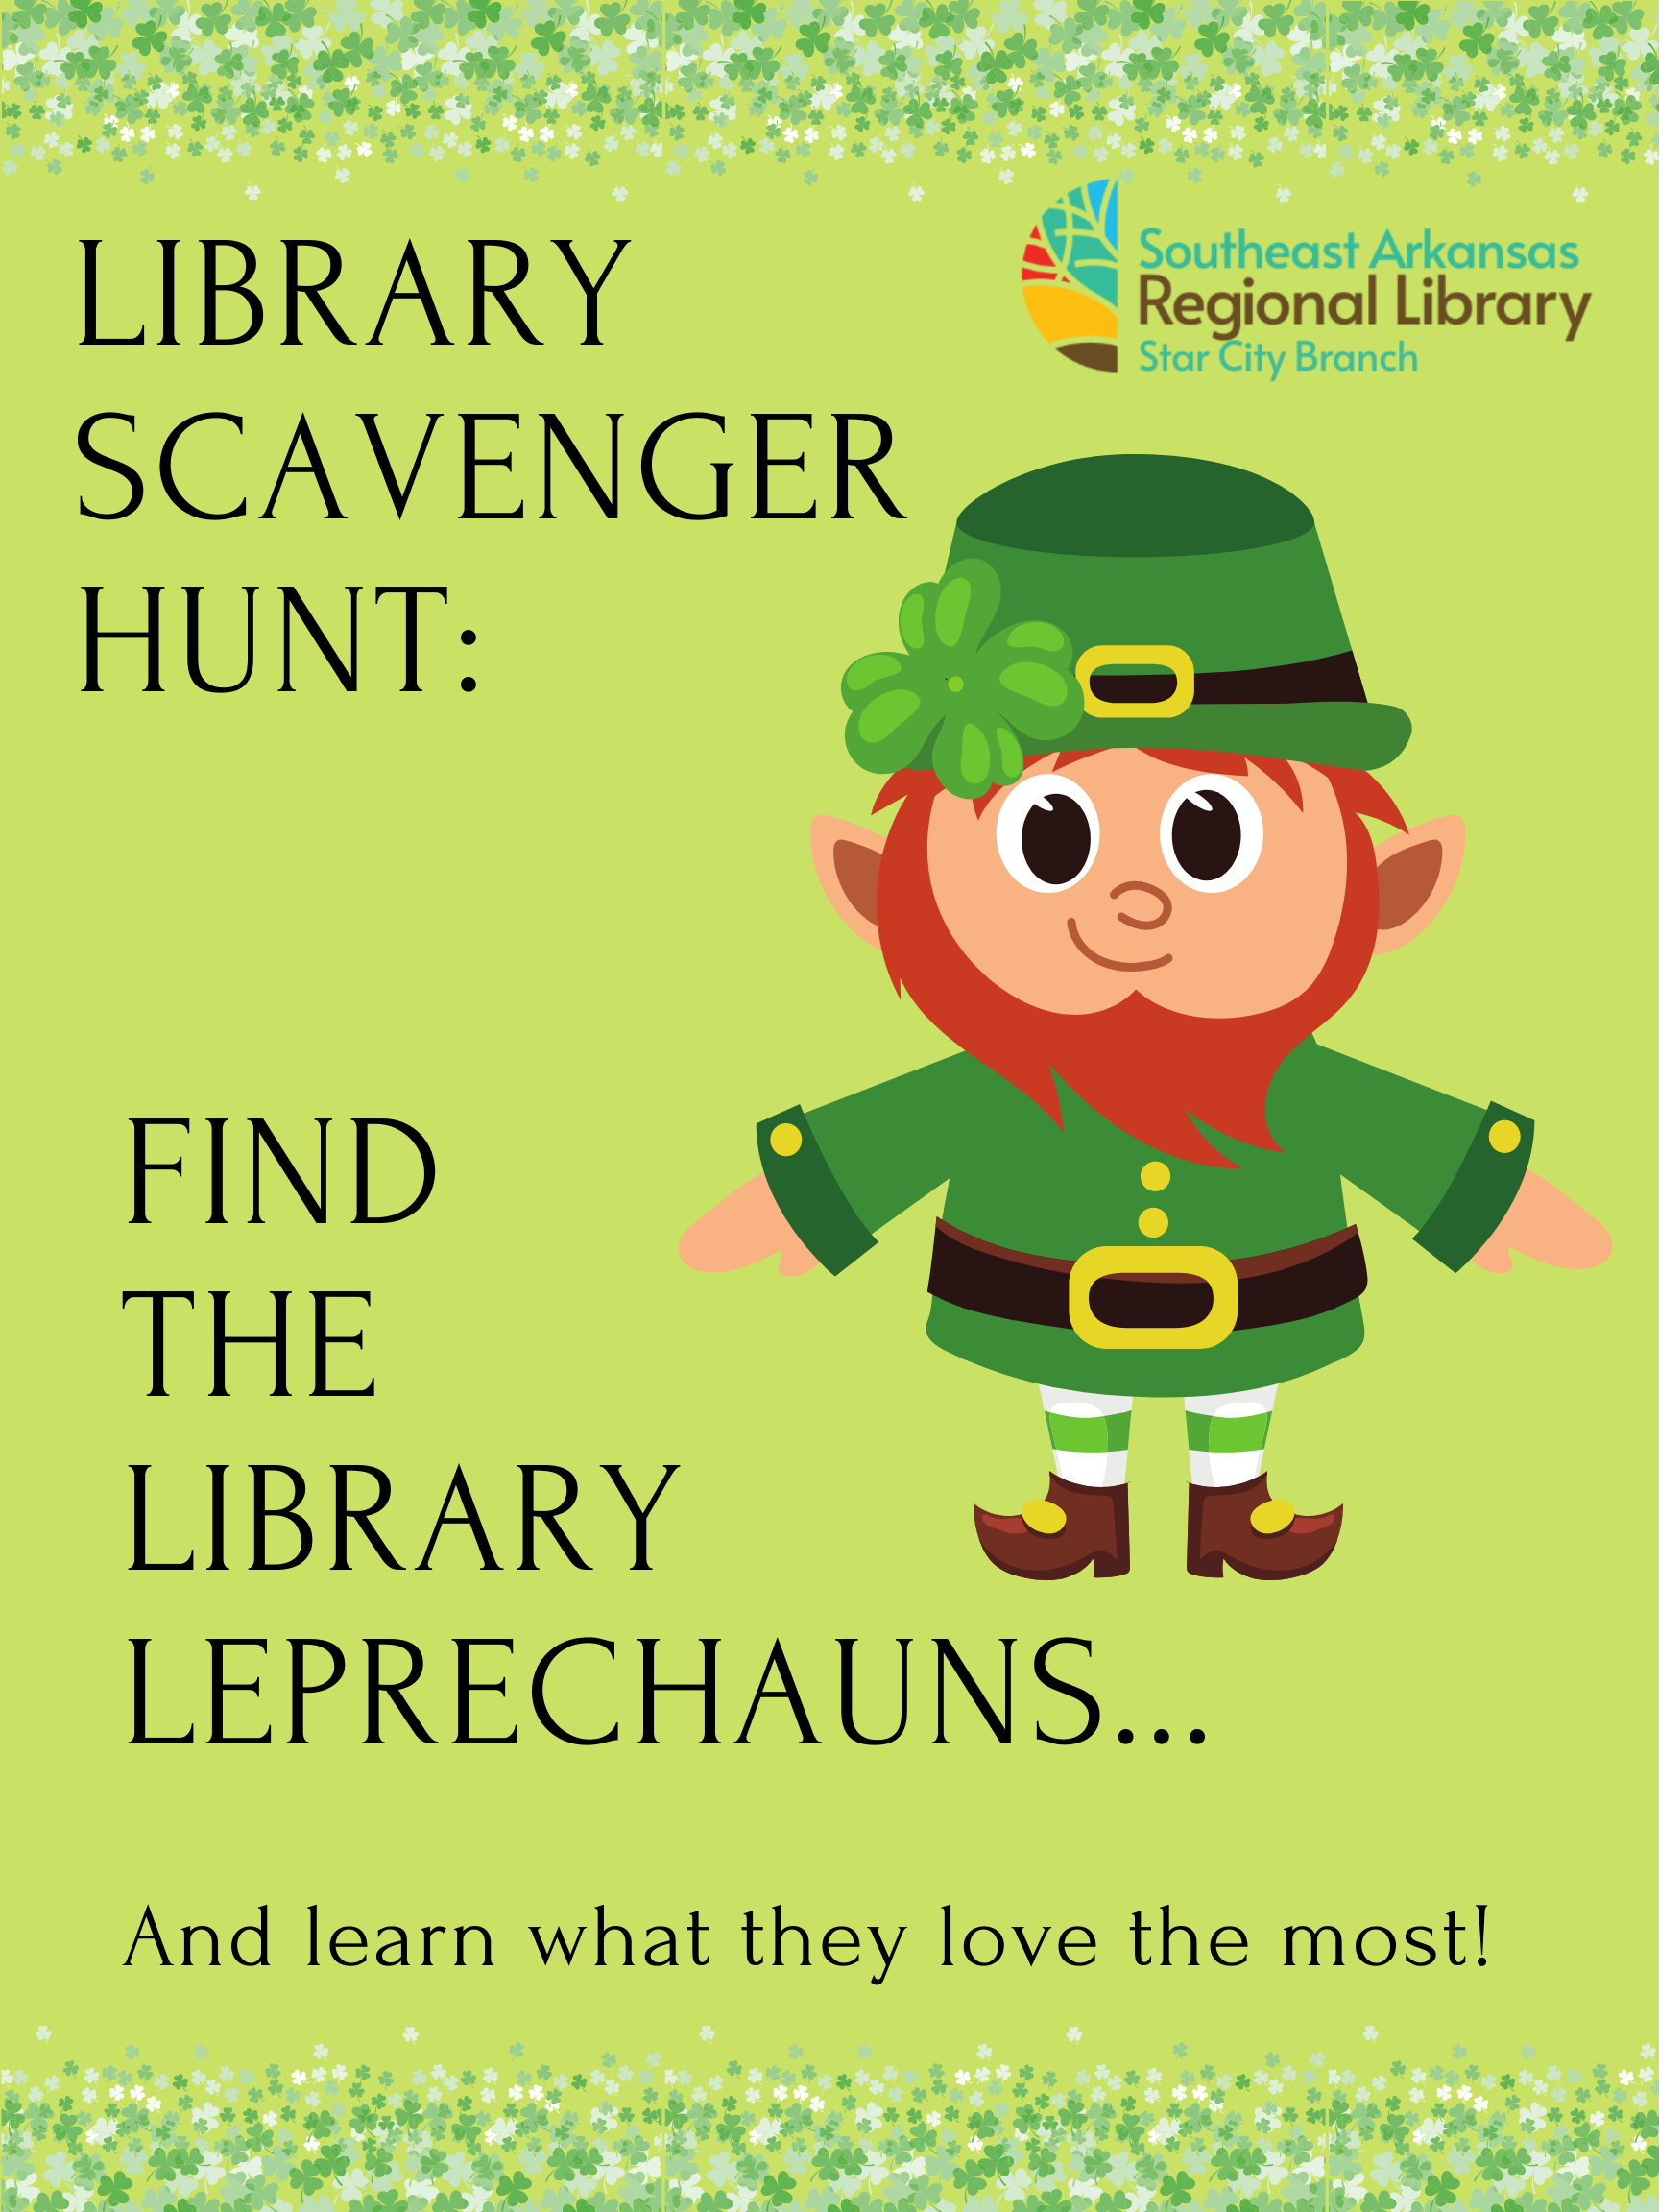 Poste with a leprechaun and written instructions for the scavenger hunt.